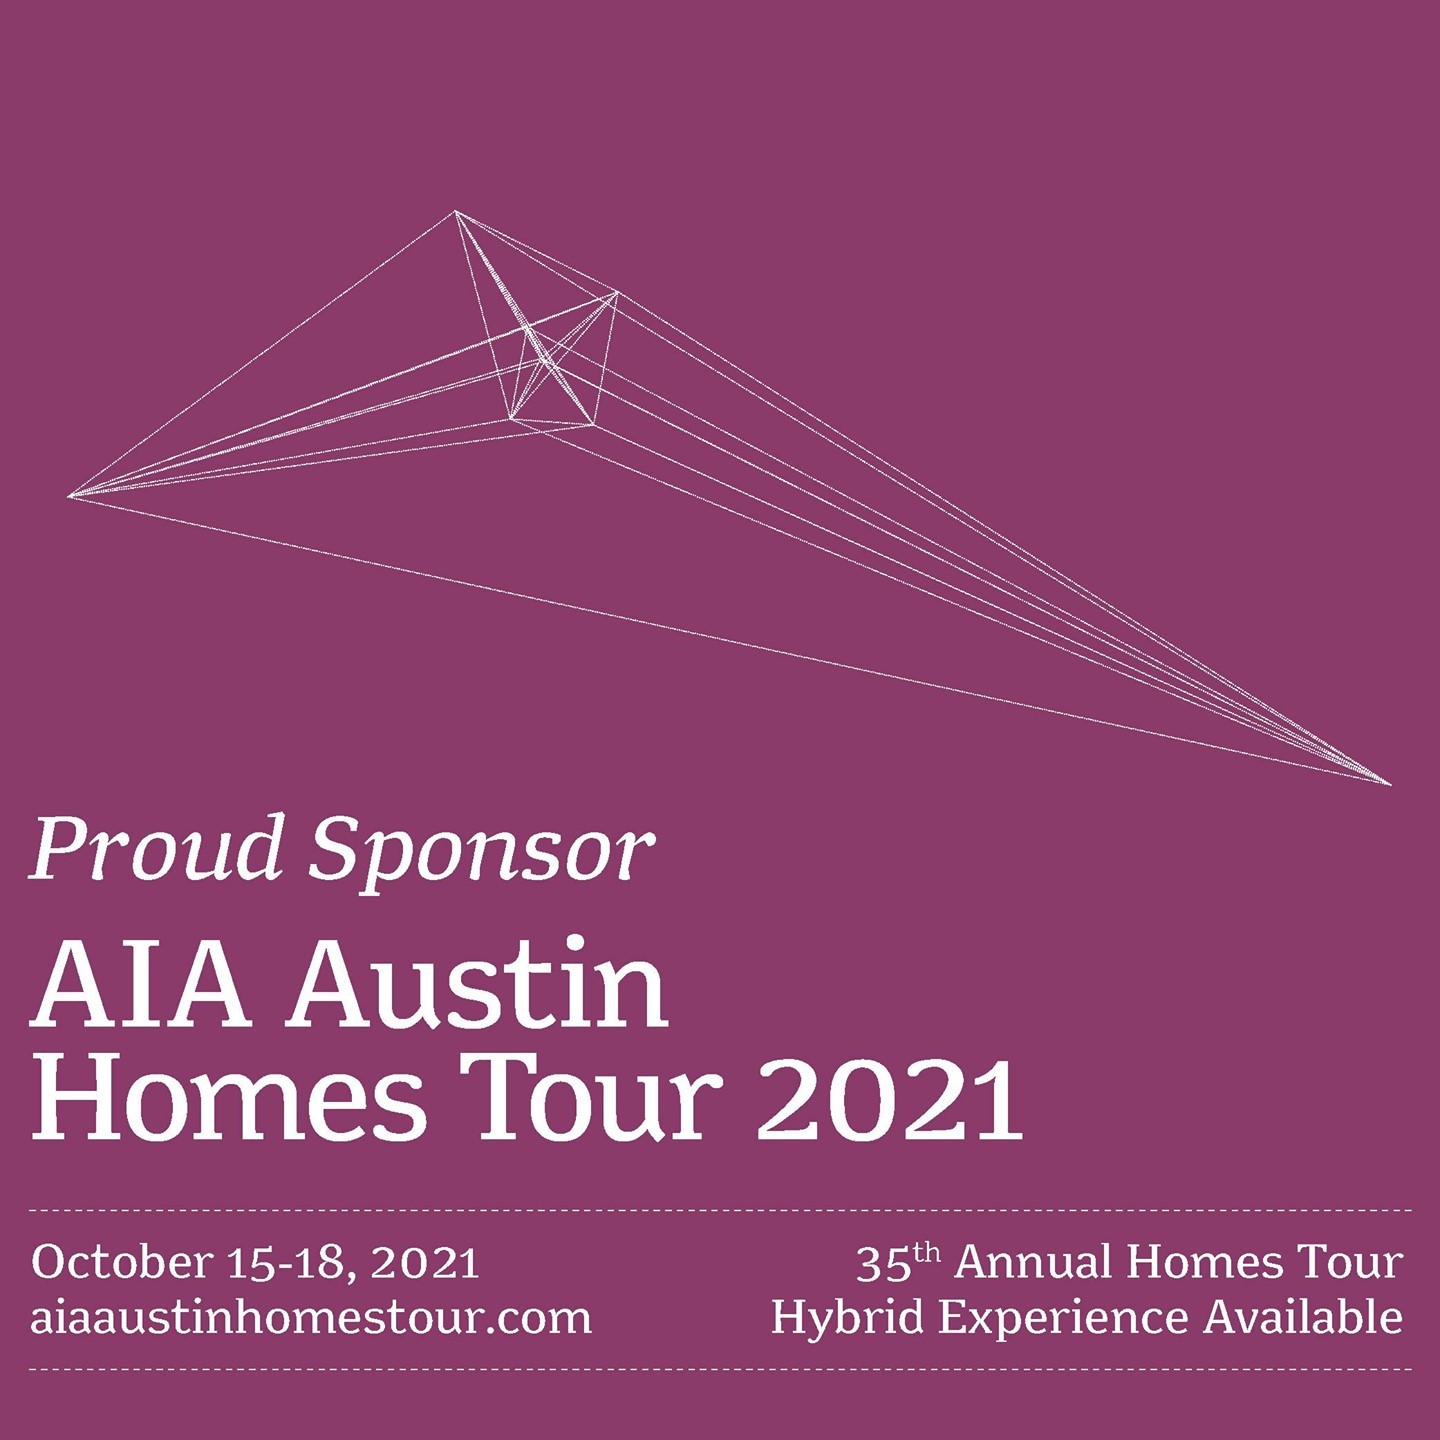 We are proud to support @aiaaustin in the upcoming 35th Annual AIA Austin Homes Tour taking place October 15th -18th! We would love to see you there. Get your tickets: registration.socio.events/e/aiaaustinhomestour2021 ⁠
⁠
Photographer: @tobin.davies